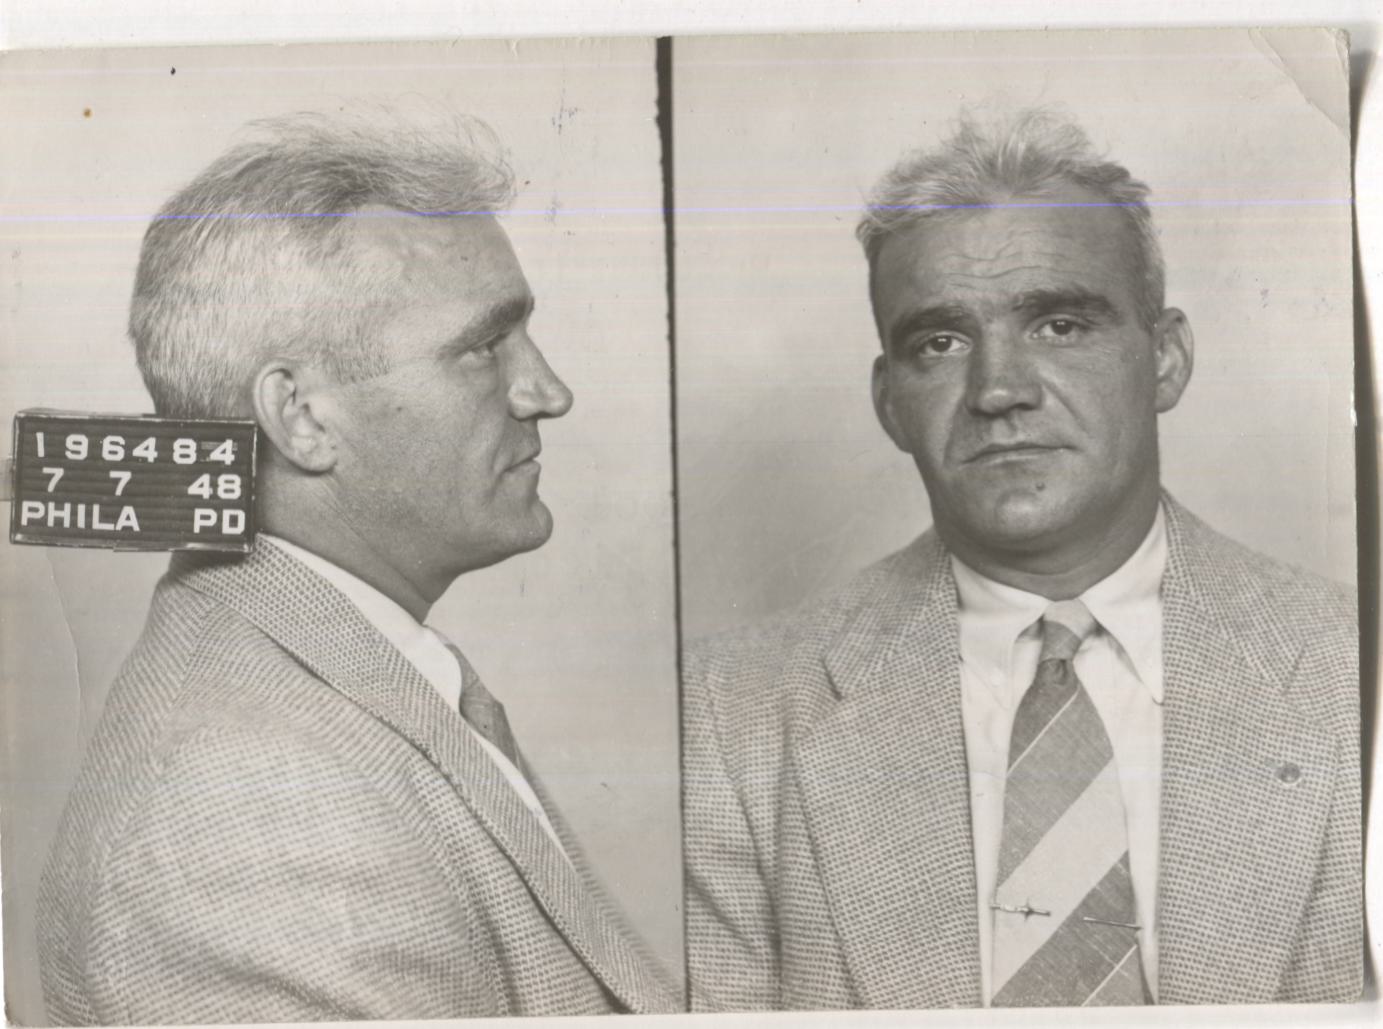 Charles Wurth Mugshot - Arrested on 7/7/1948 for Poolselling